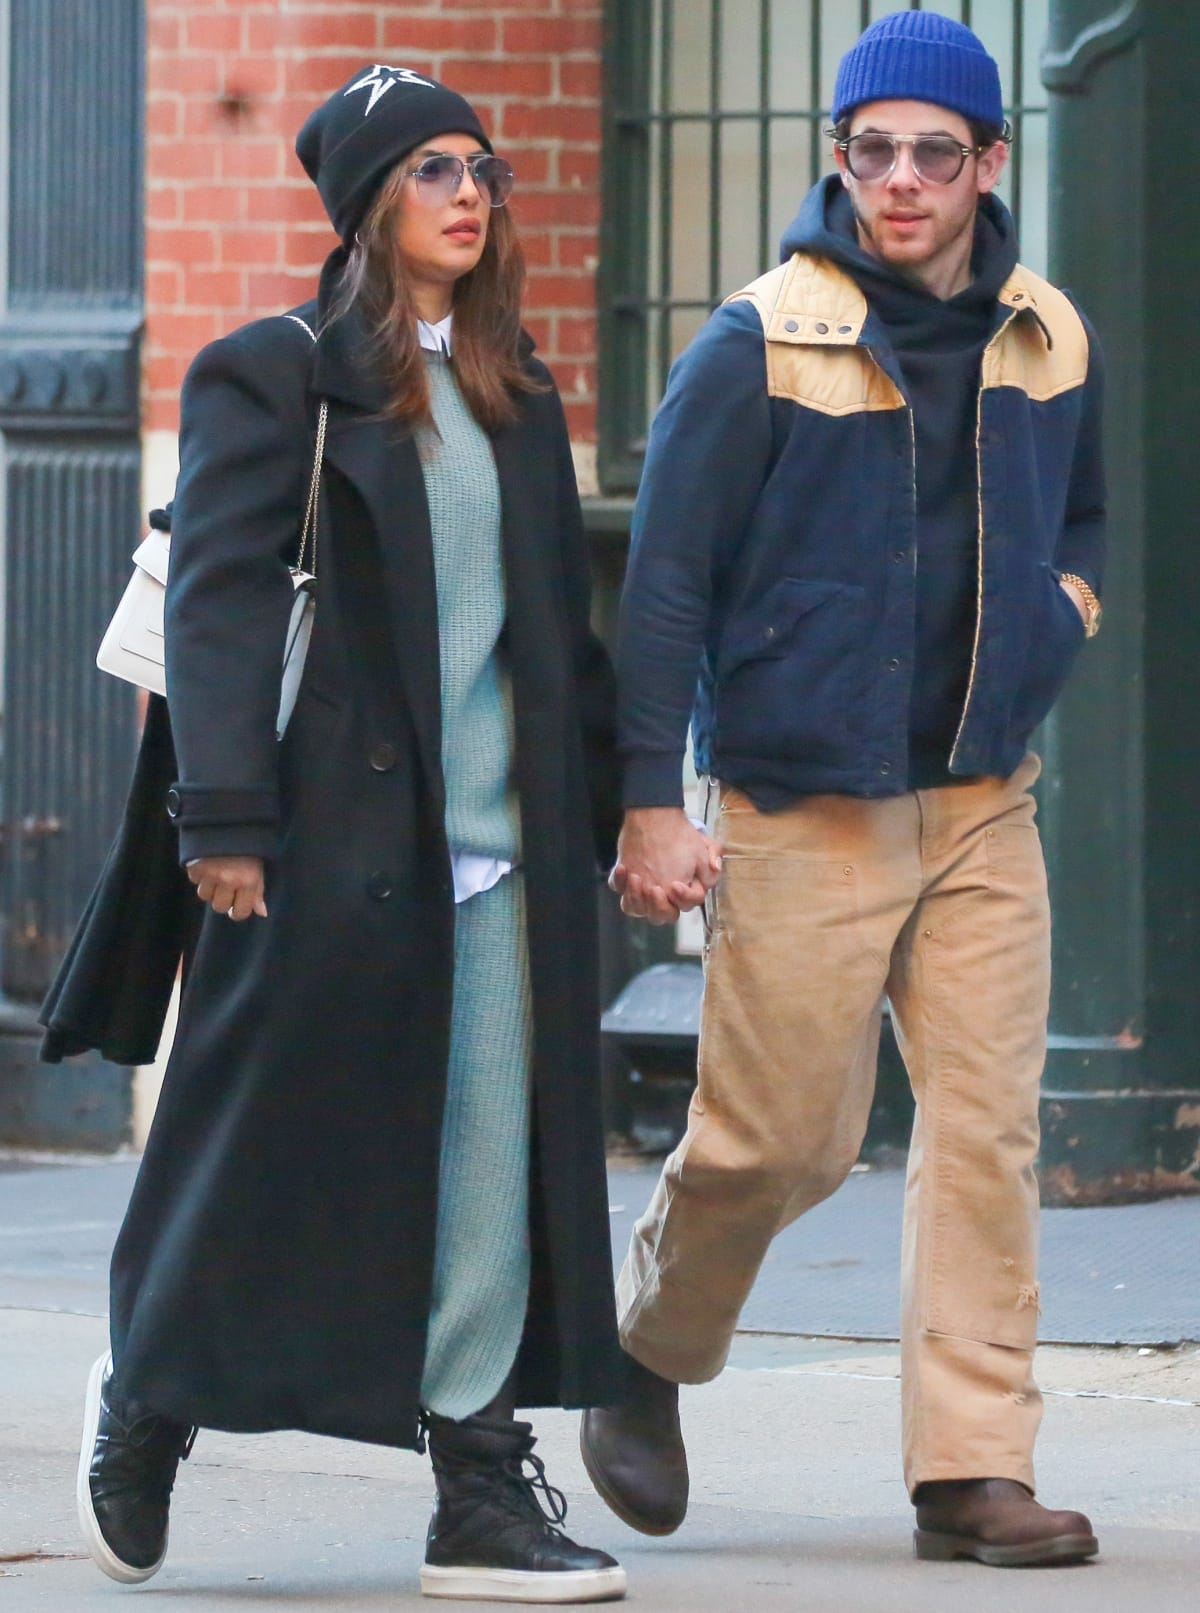 Nick Jonas wearing a black pullover with a navy jacket, beige pants, and a royal blue beanie